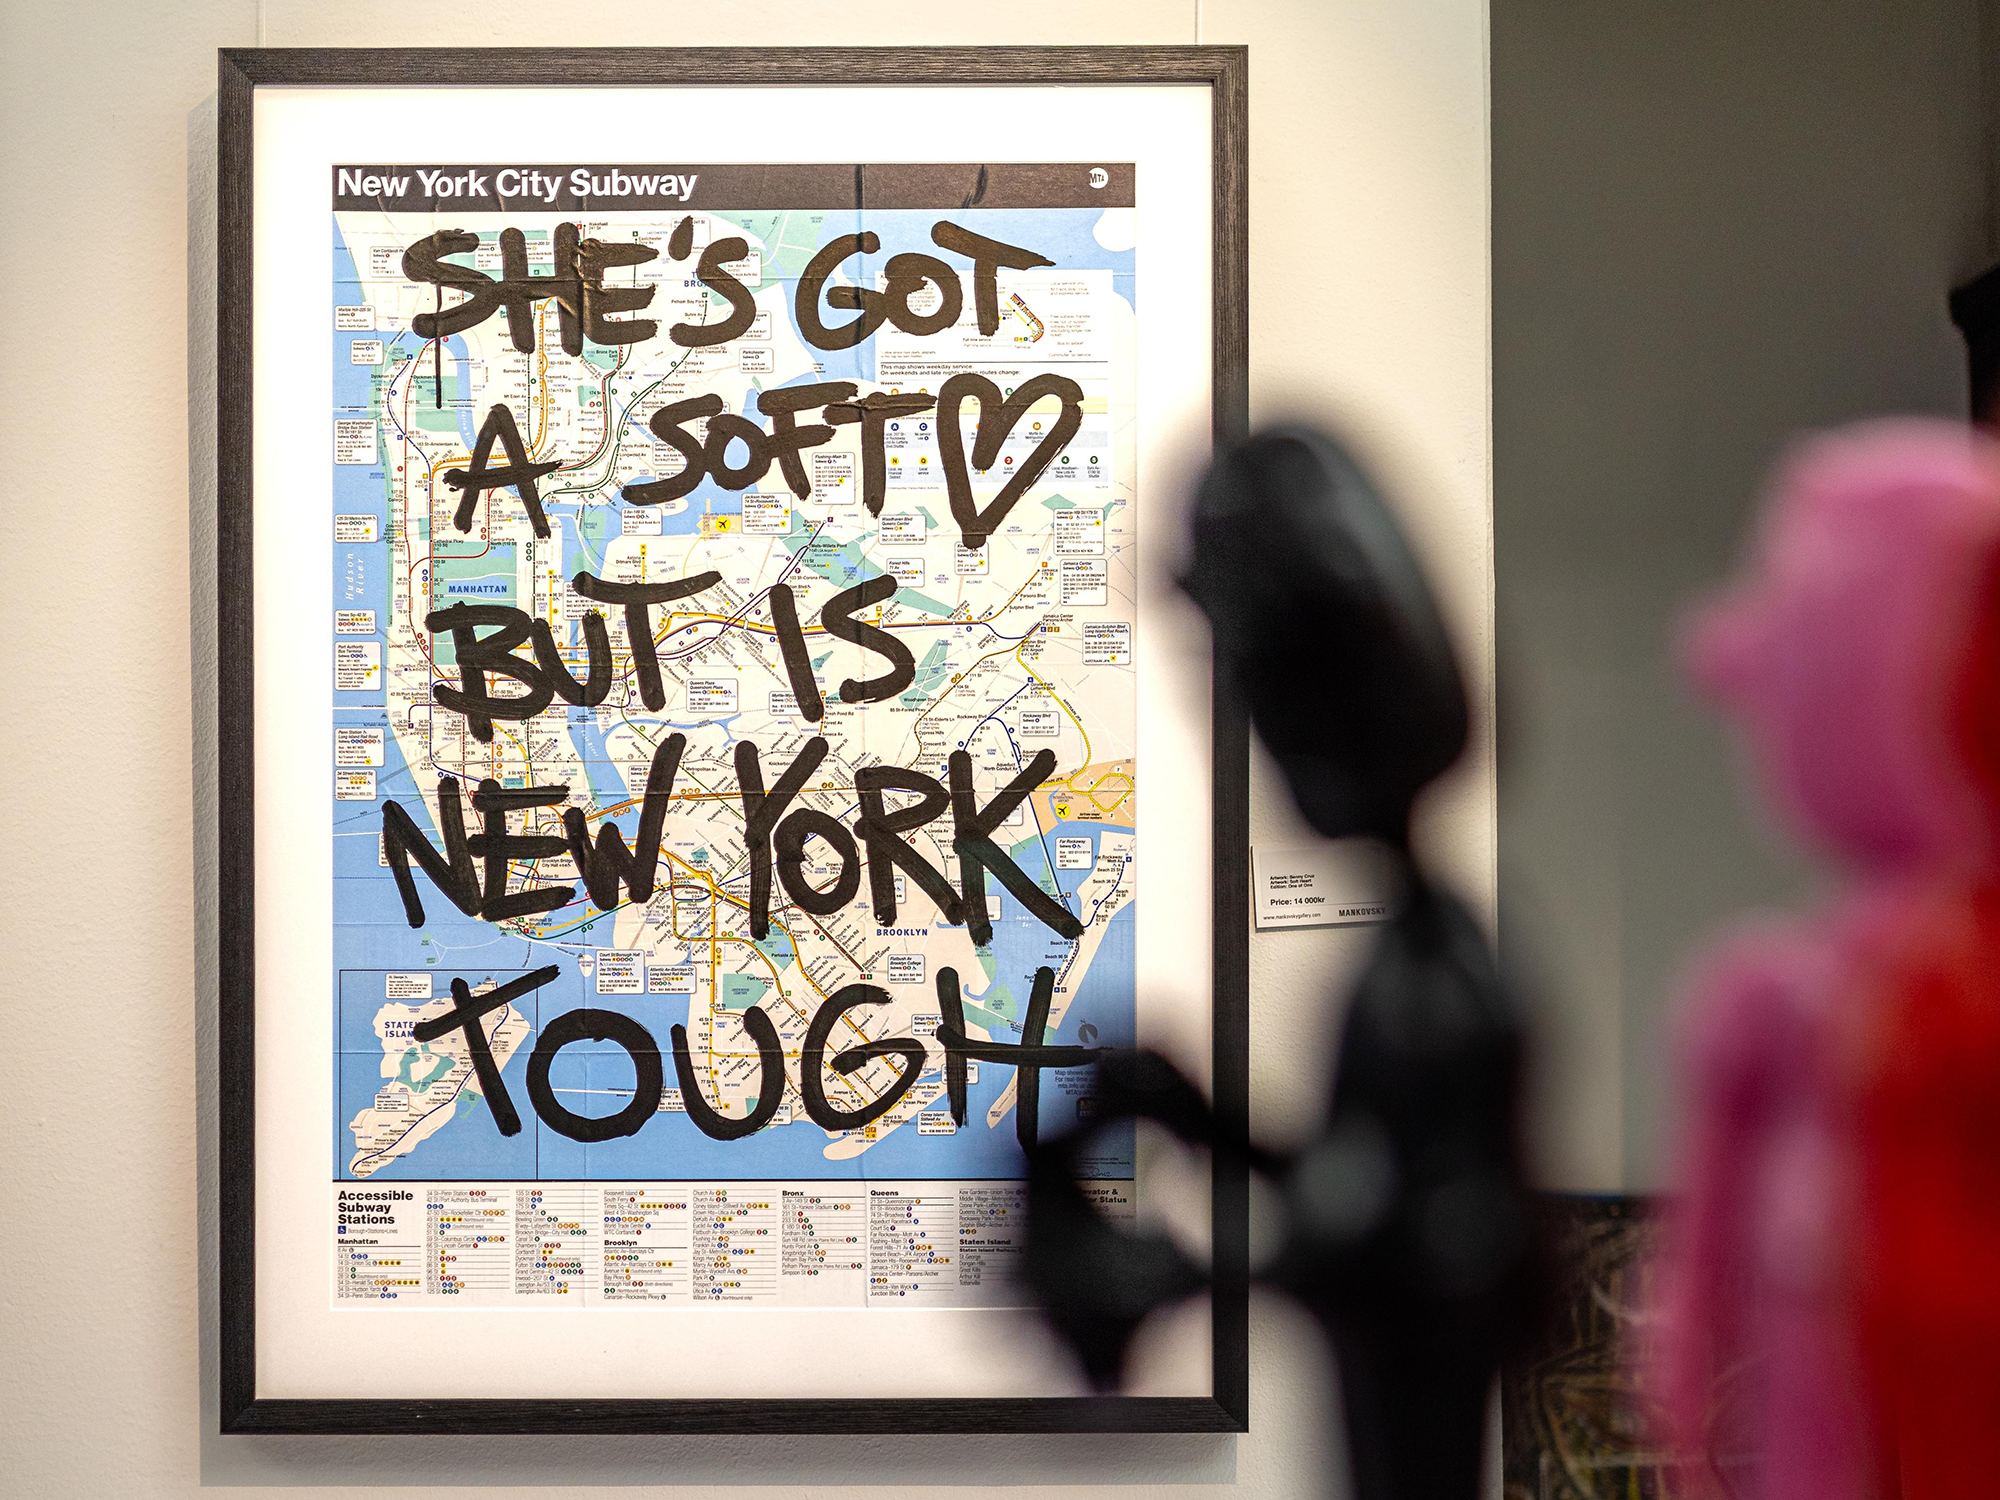 A poster of the subway map in New York with the text "she's got a soft heart but it is New York tough" written on top, like a graffiti